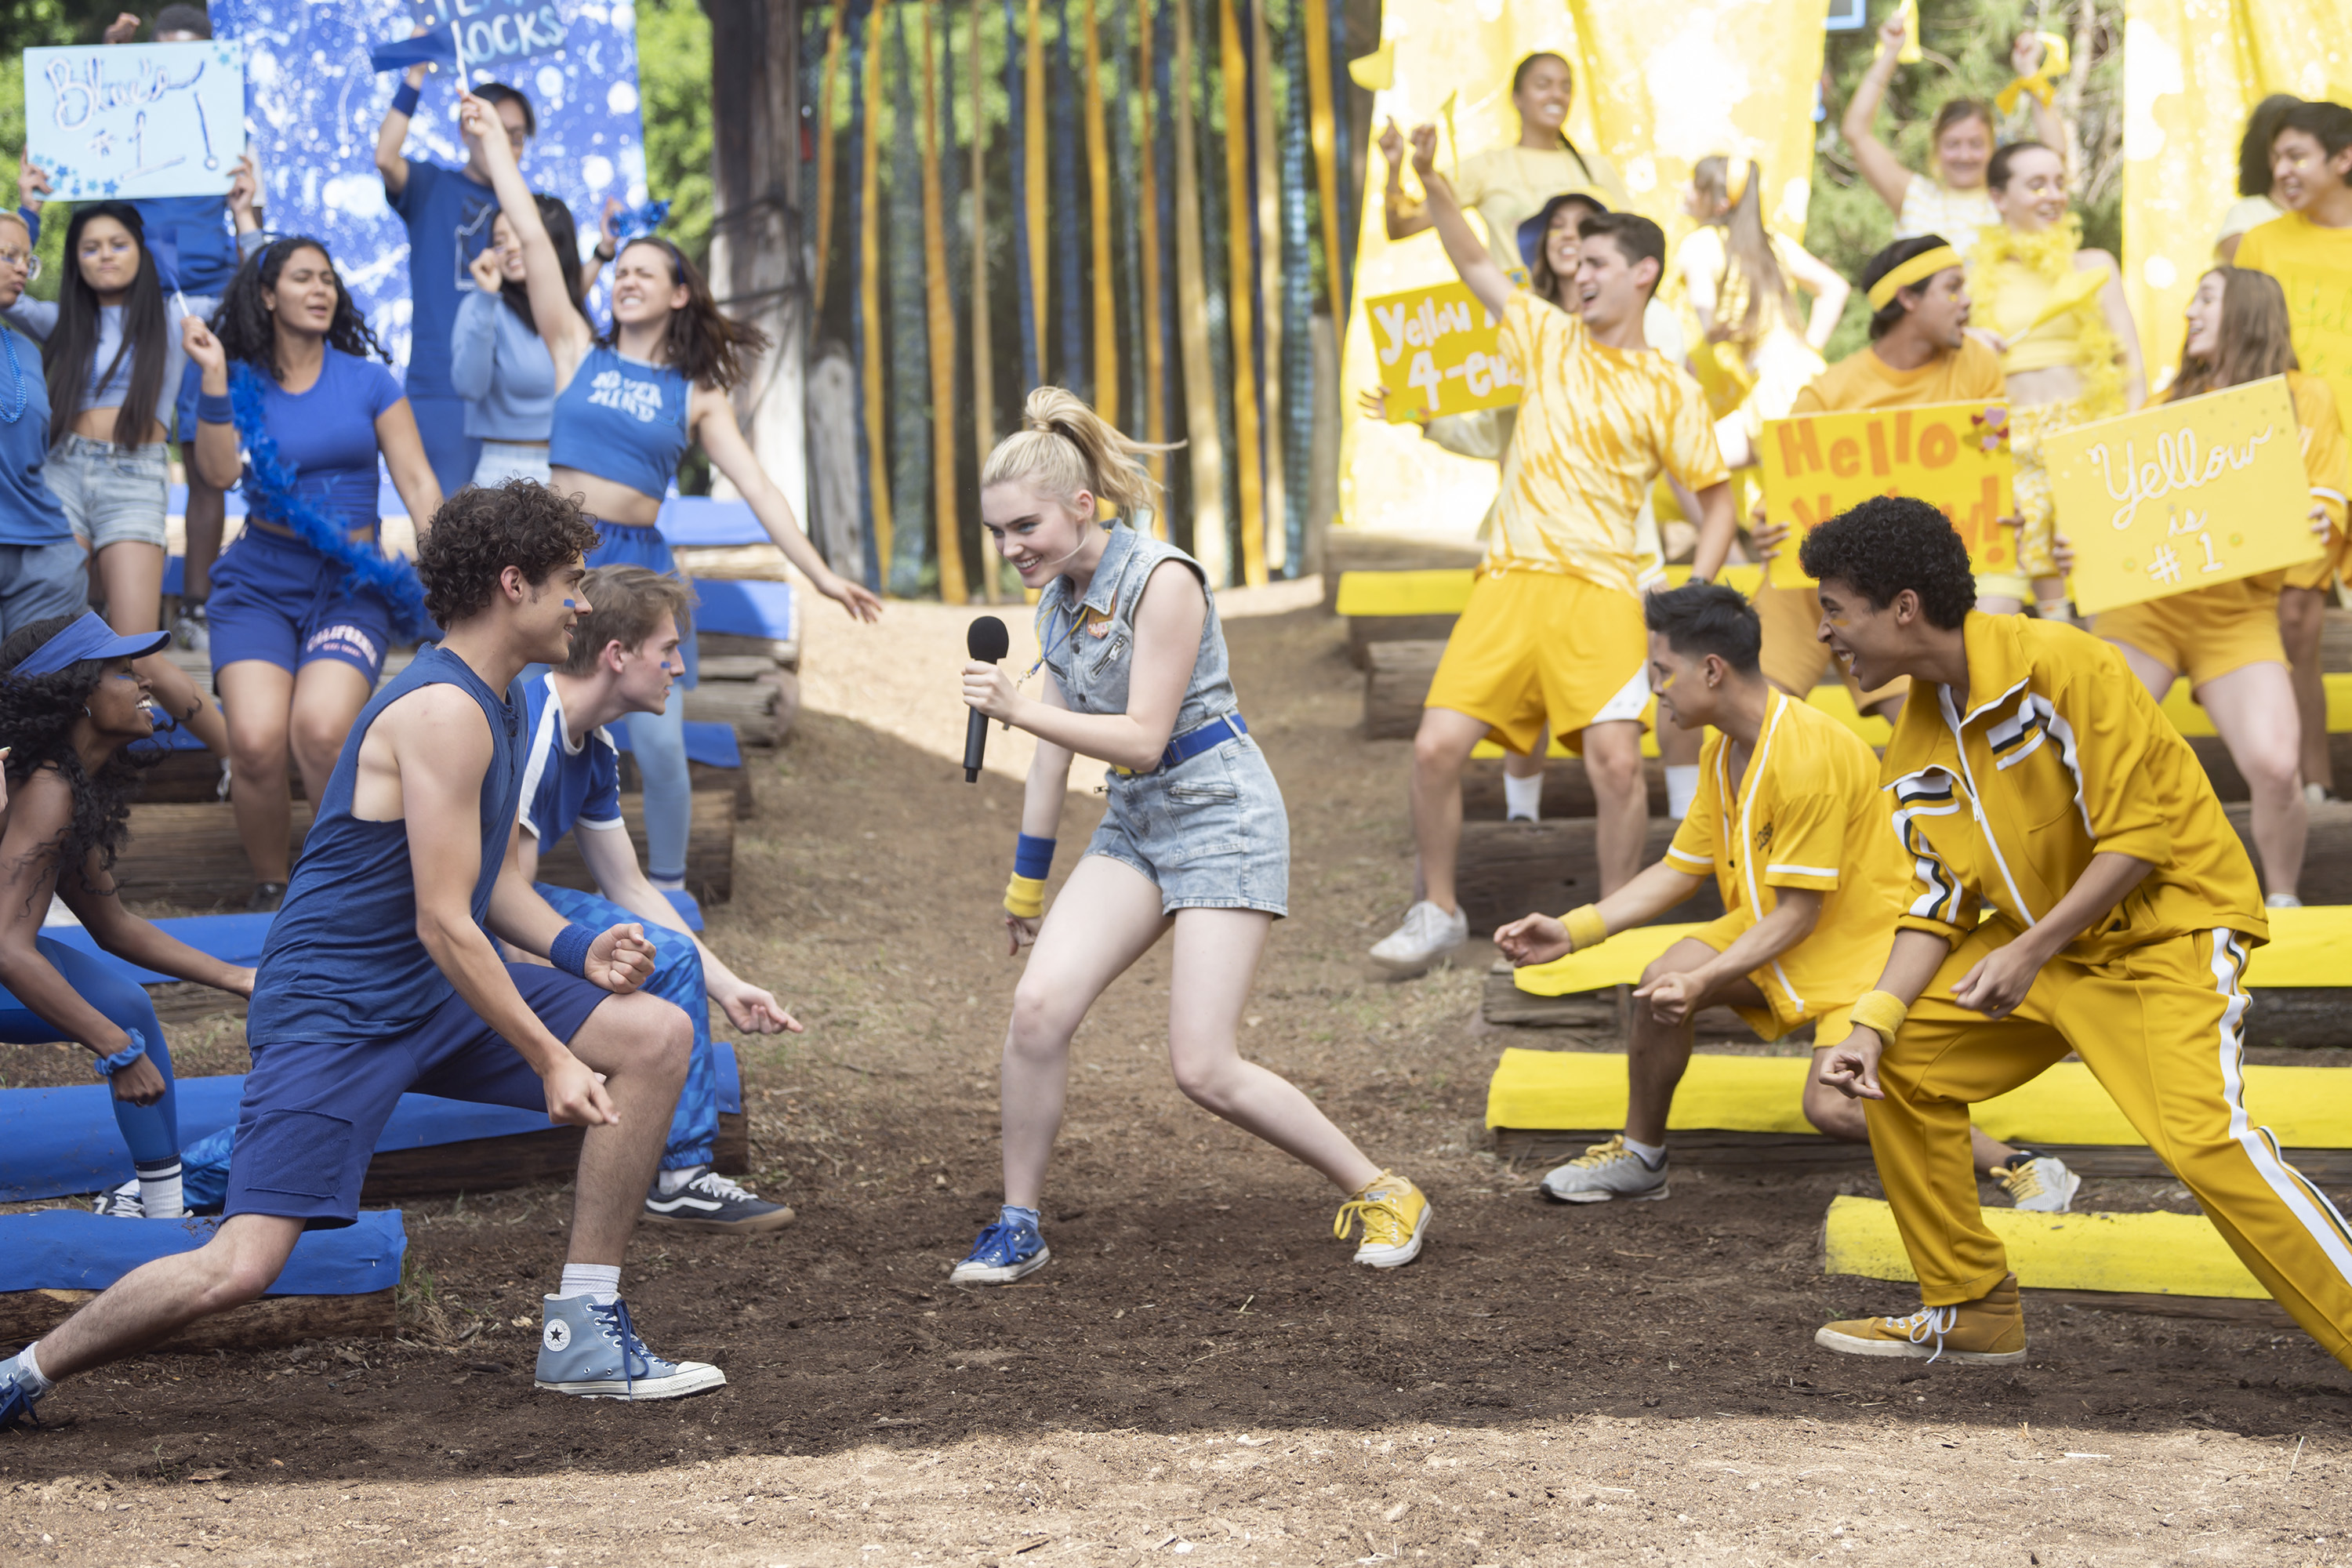 HIGH SCHOOL MUSICAL: THE MUSICAL: THE SERIES - "Color War"